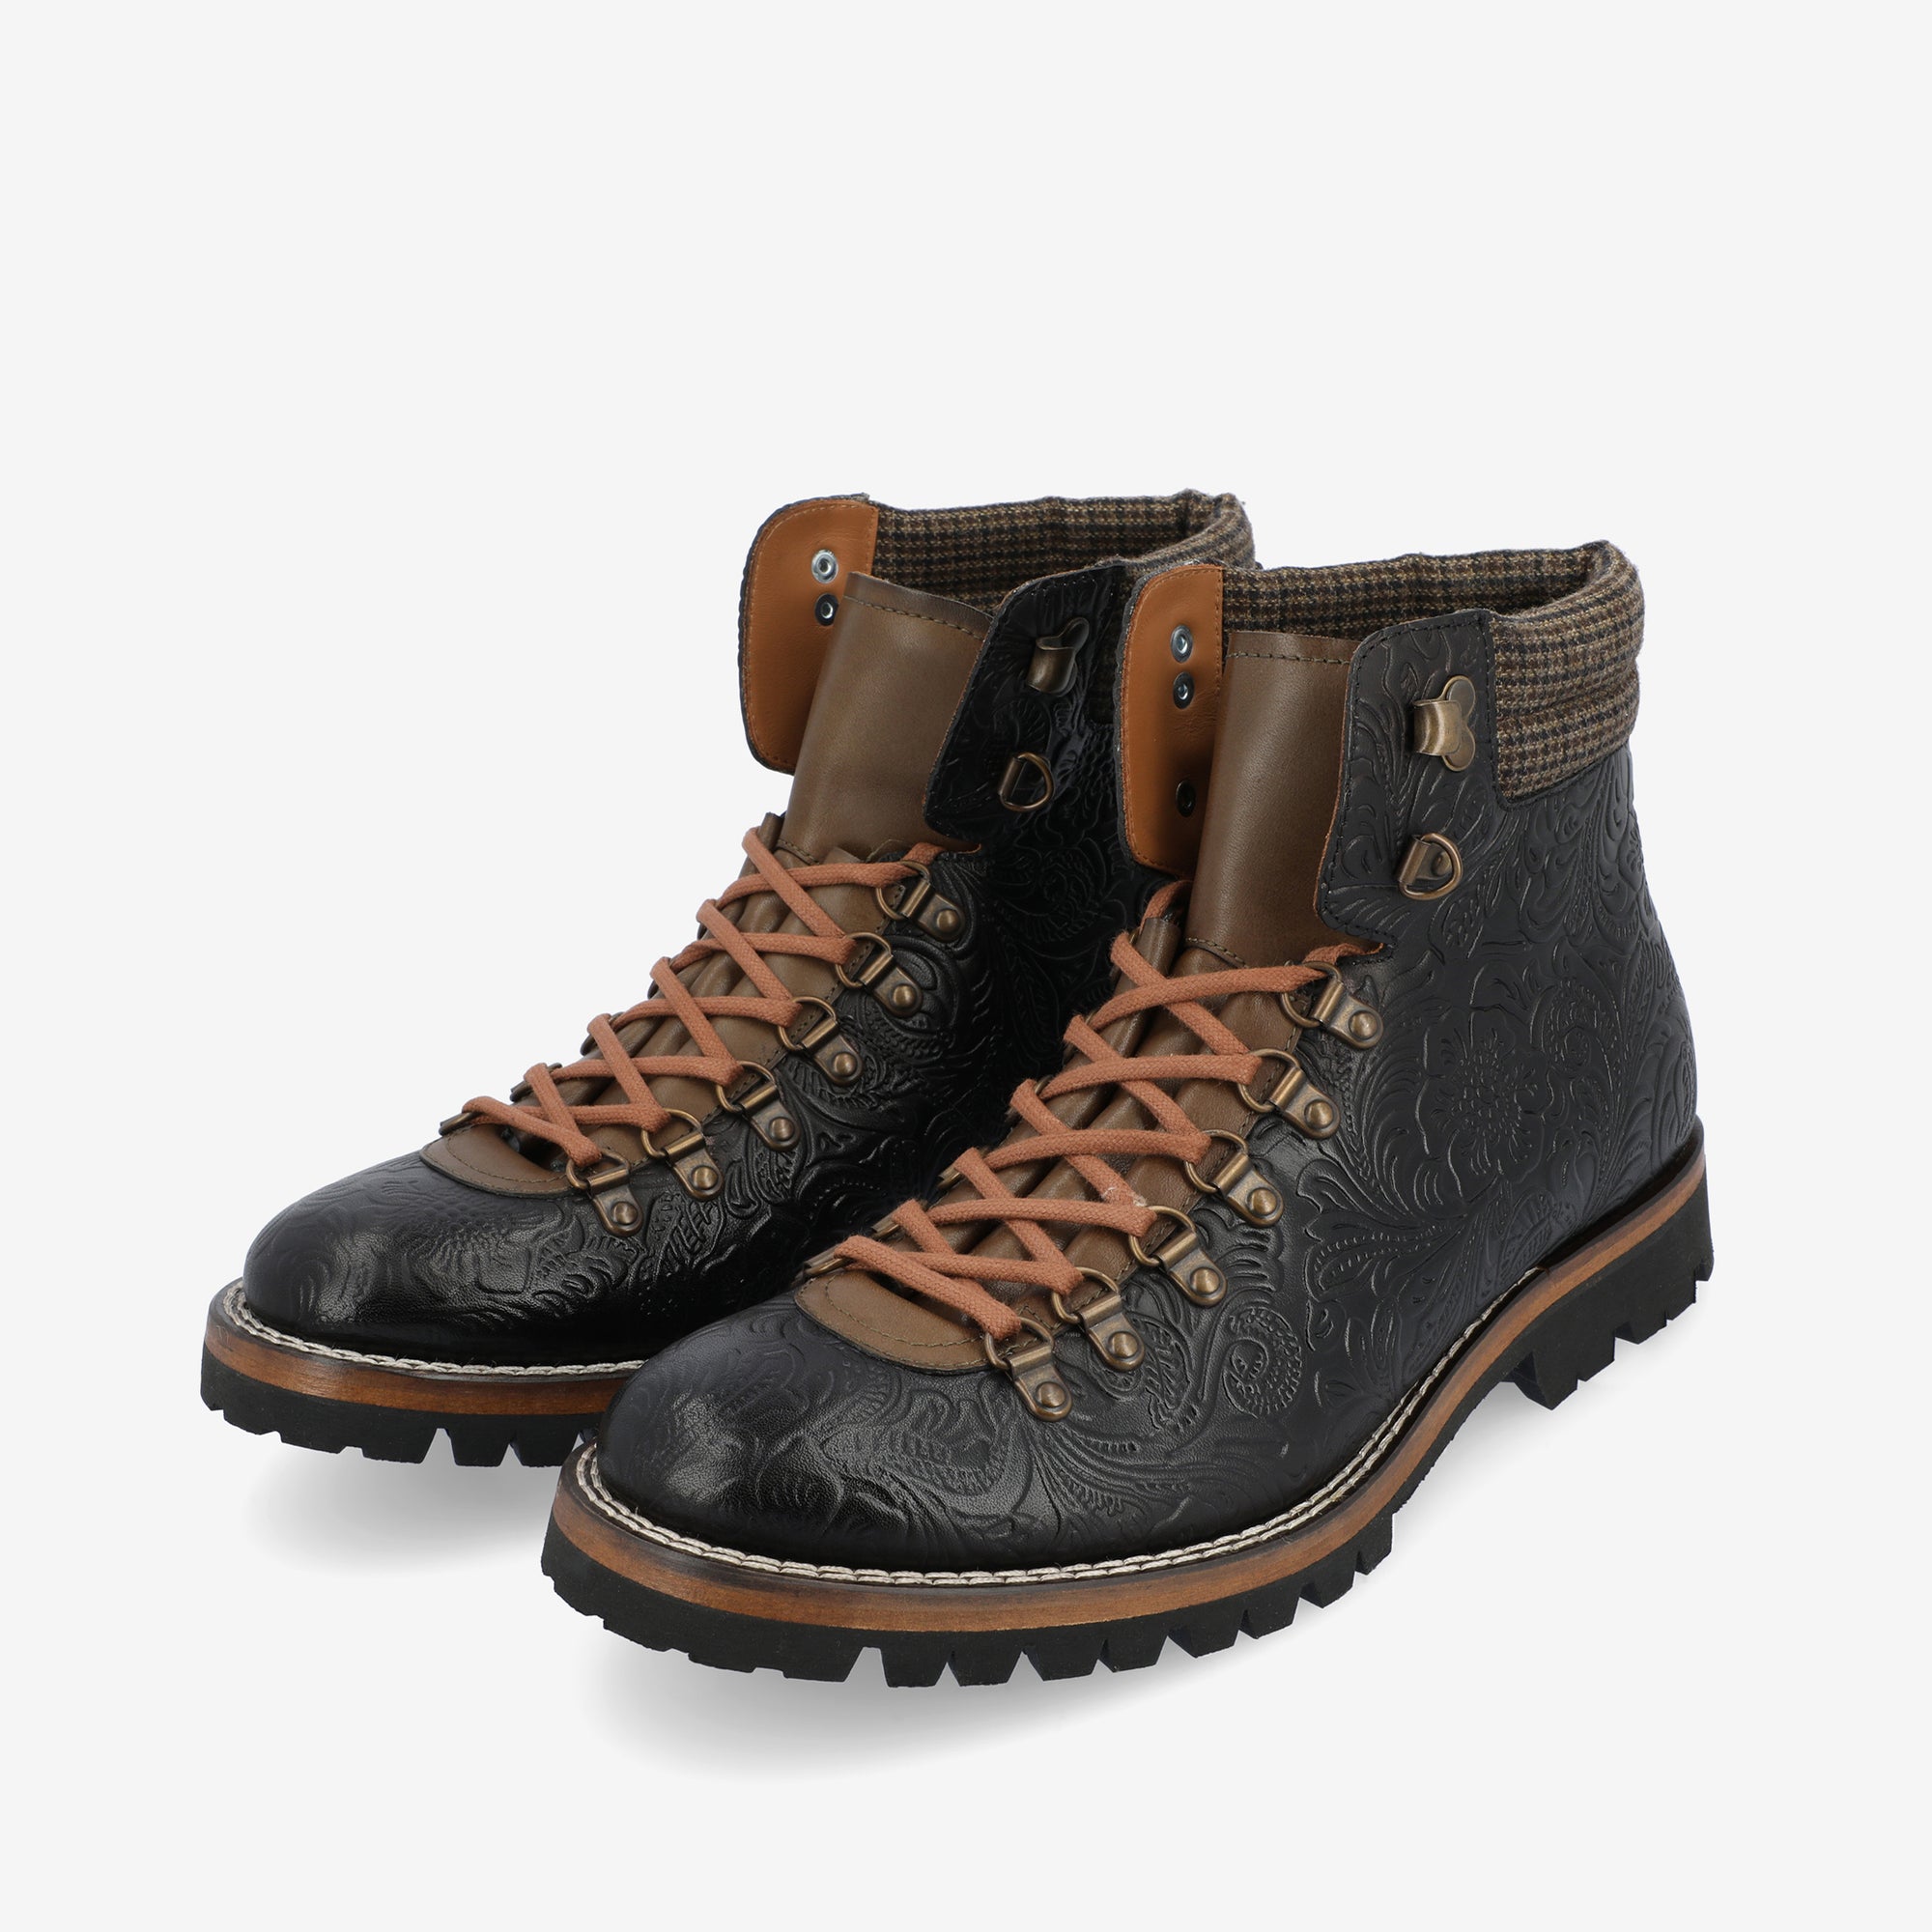 The Viking Boot in Black Floral